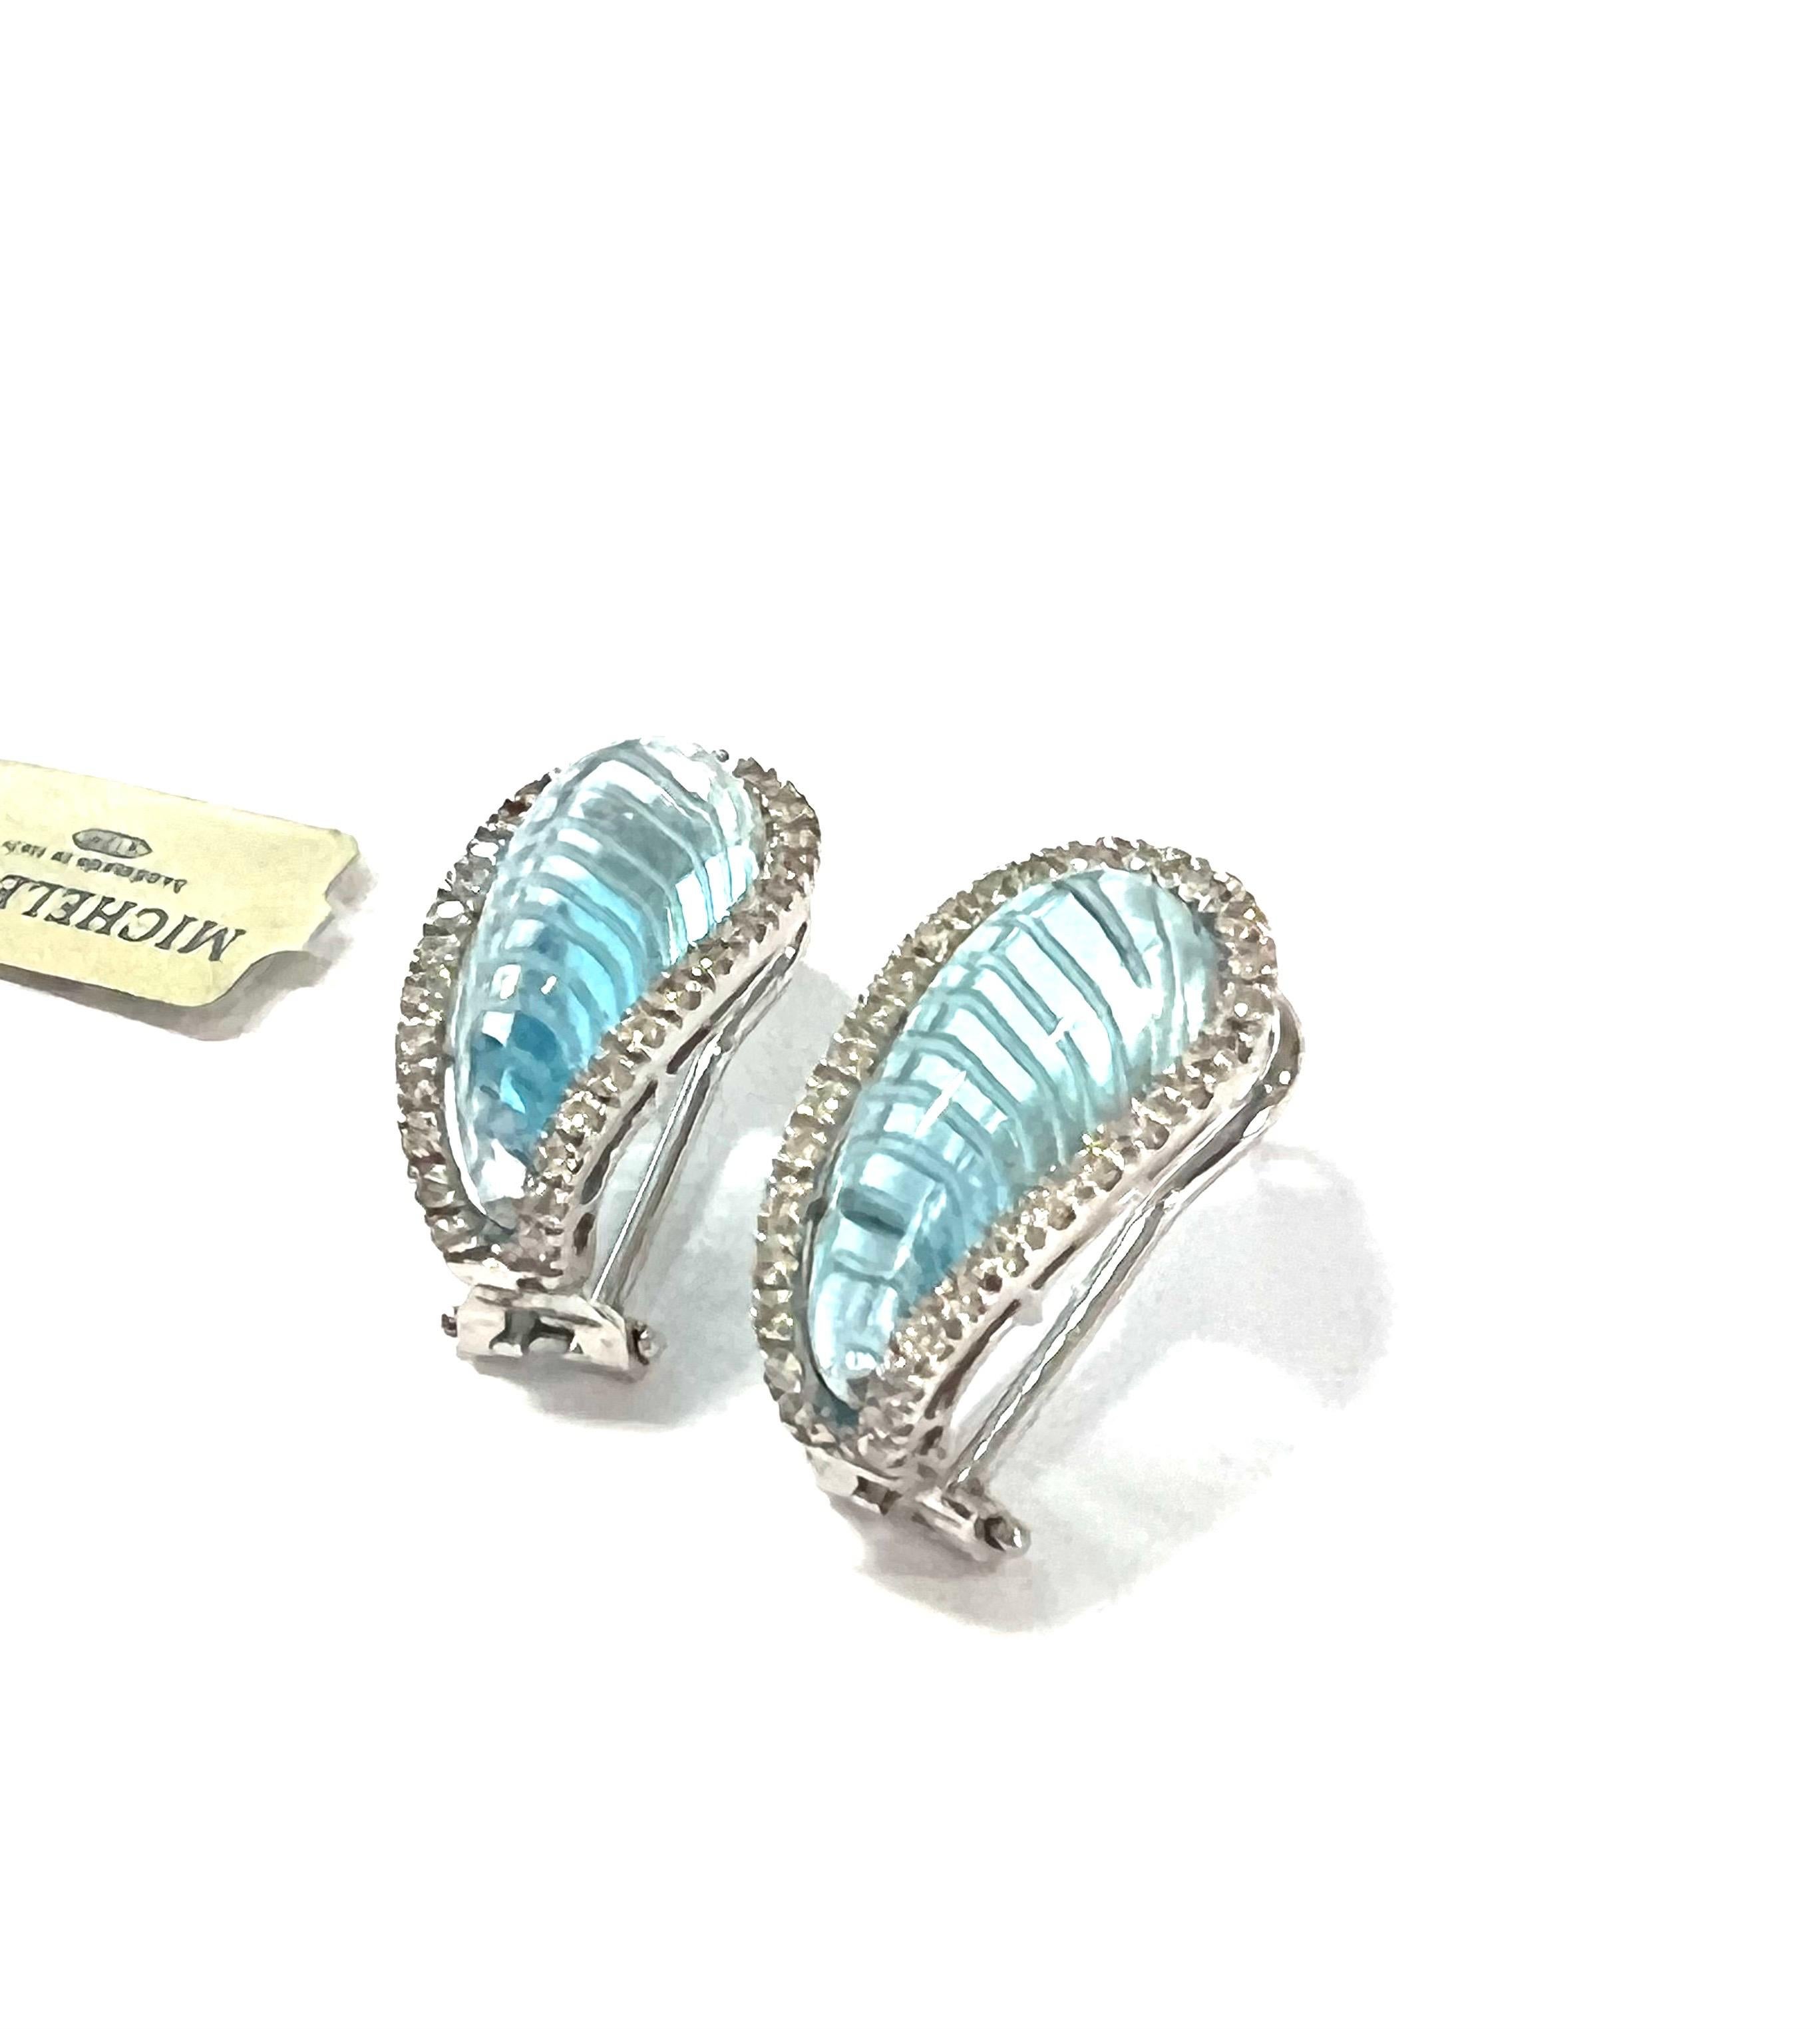 18k white gold, diamond and topaz earrings
Total Weight gr. 13,3
Gold weight gr. 9,2
2 blu topazes.
60 Diamonds.
Stamp 750 Italy 10MI
